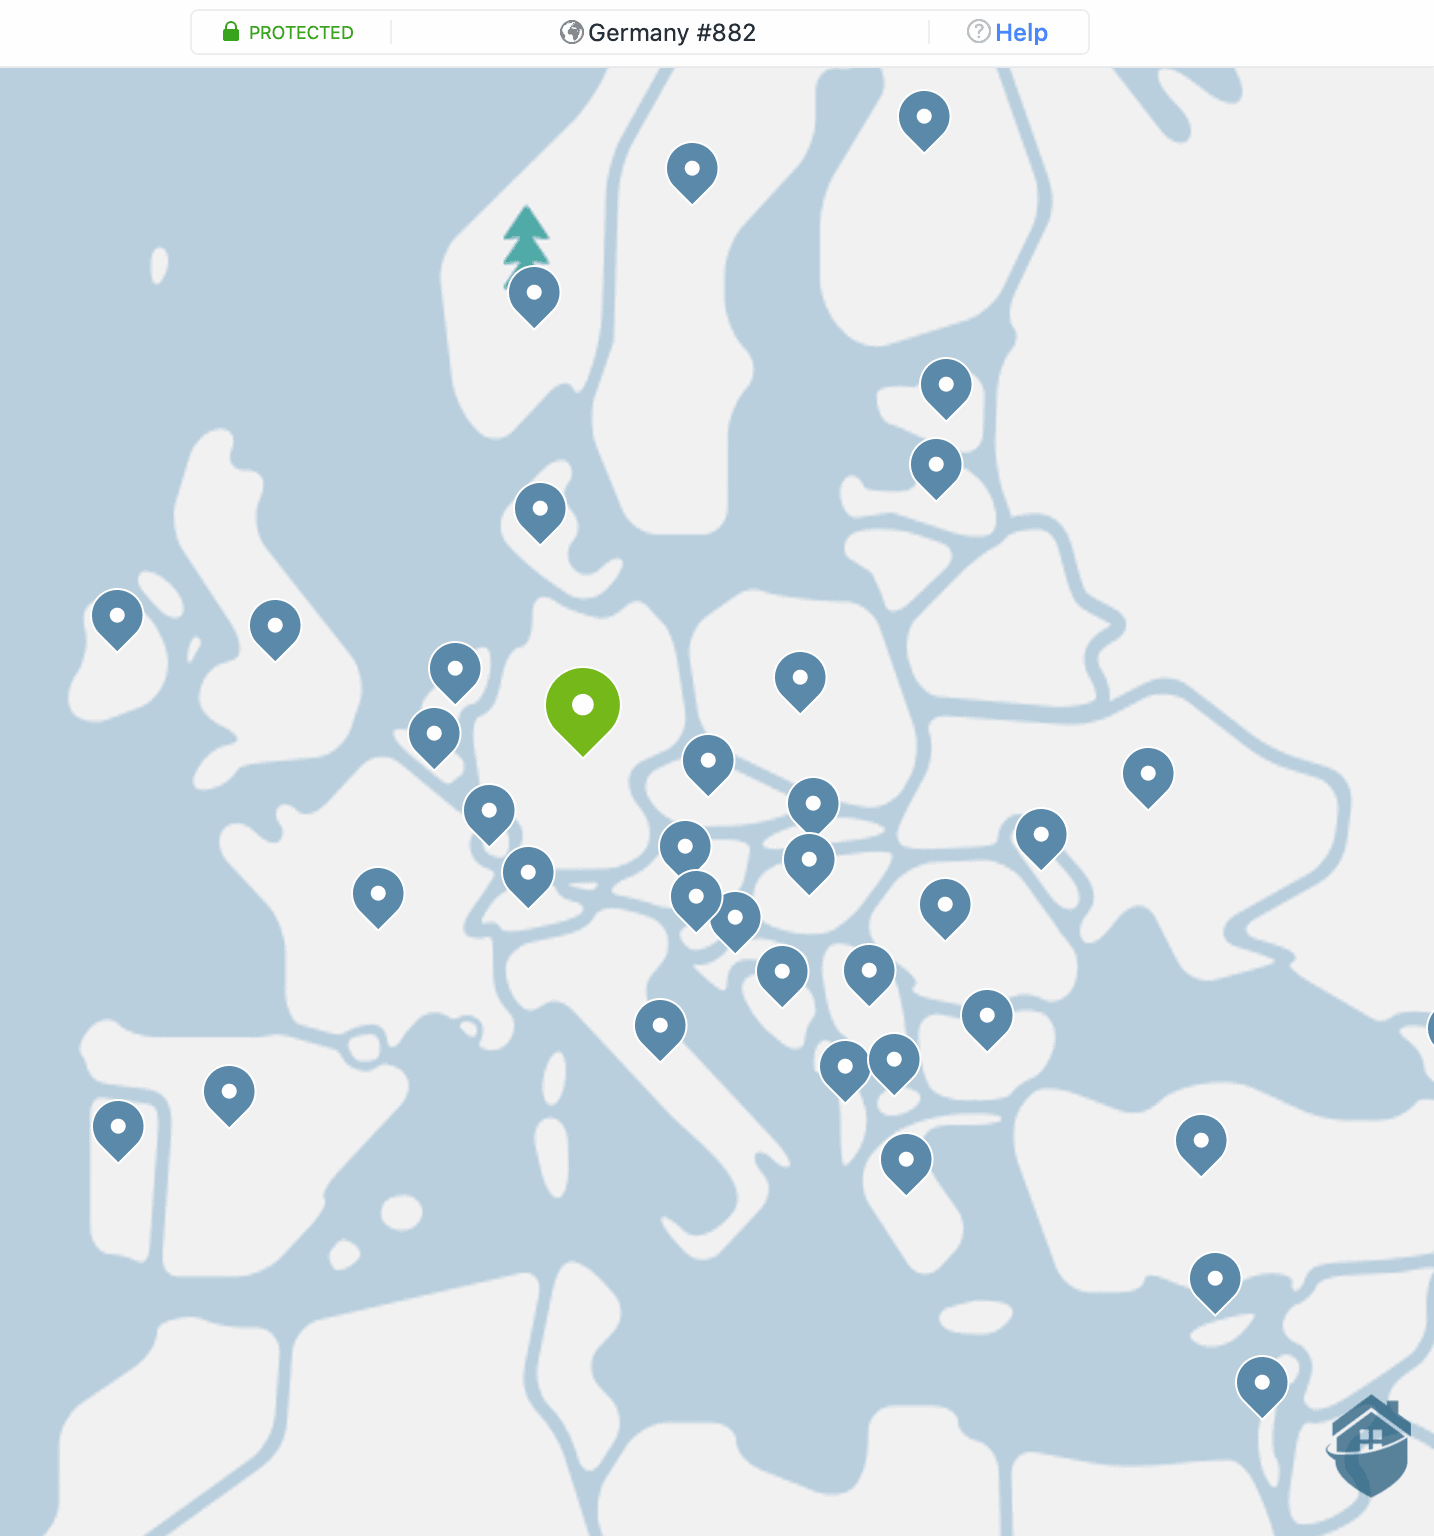 Connected in Germany using NordVPN.